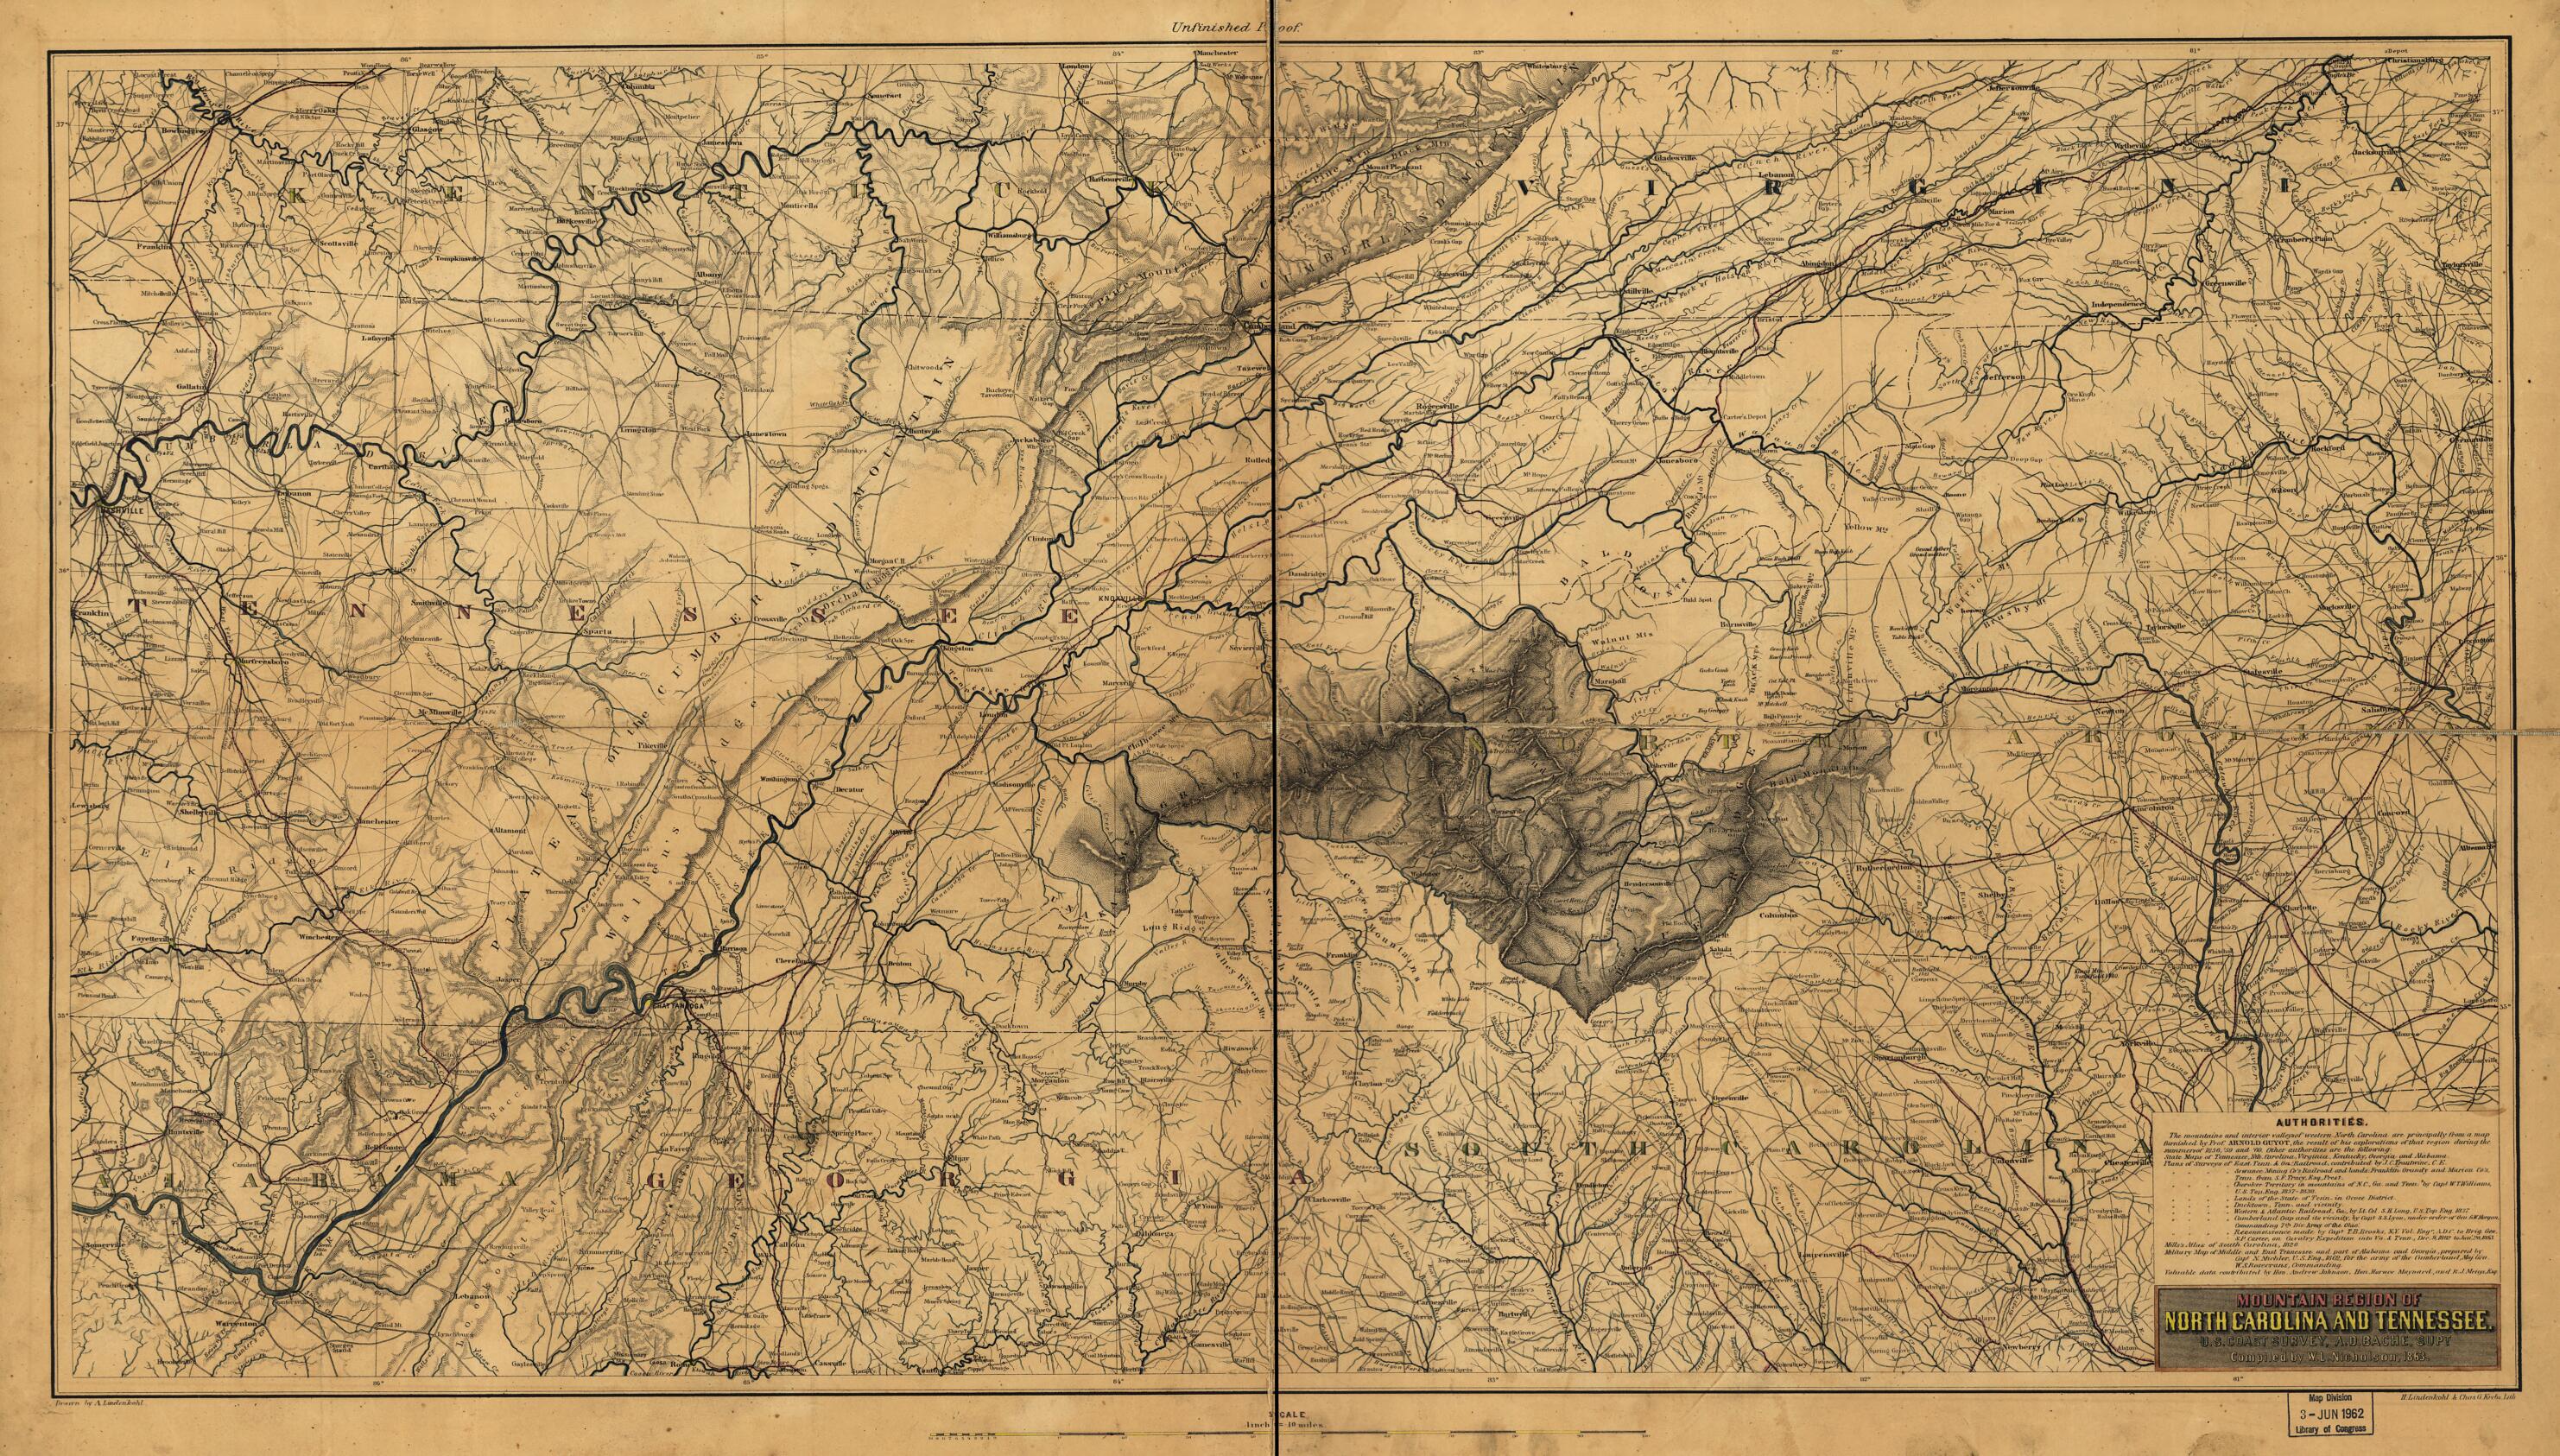 This old map of Mountain Region of North Carolina and Tennessee from 1863 was created by Joseph R. (Joseph Roswell) Hawley, Charles G. Krebs, A. Lindenkohl, H. (Henry) Lindenkohl, W. L. Nicholson,  U.S. Coast and Geodetic Survey in 1863